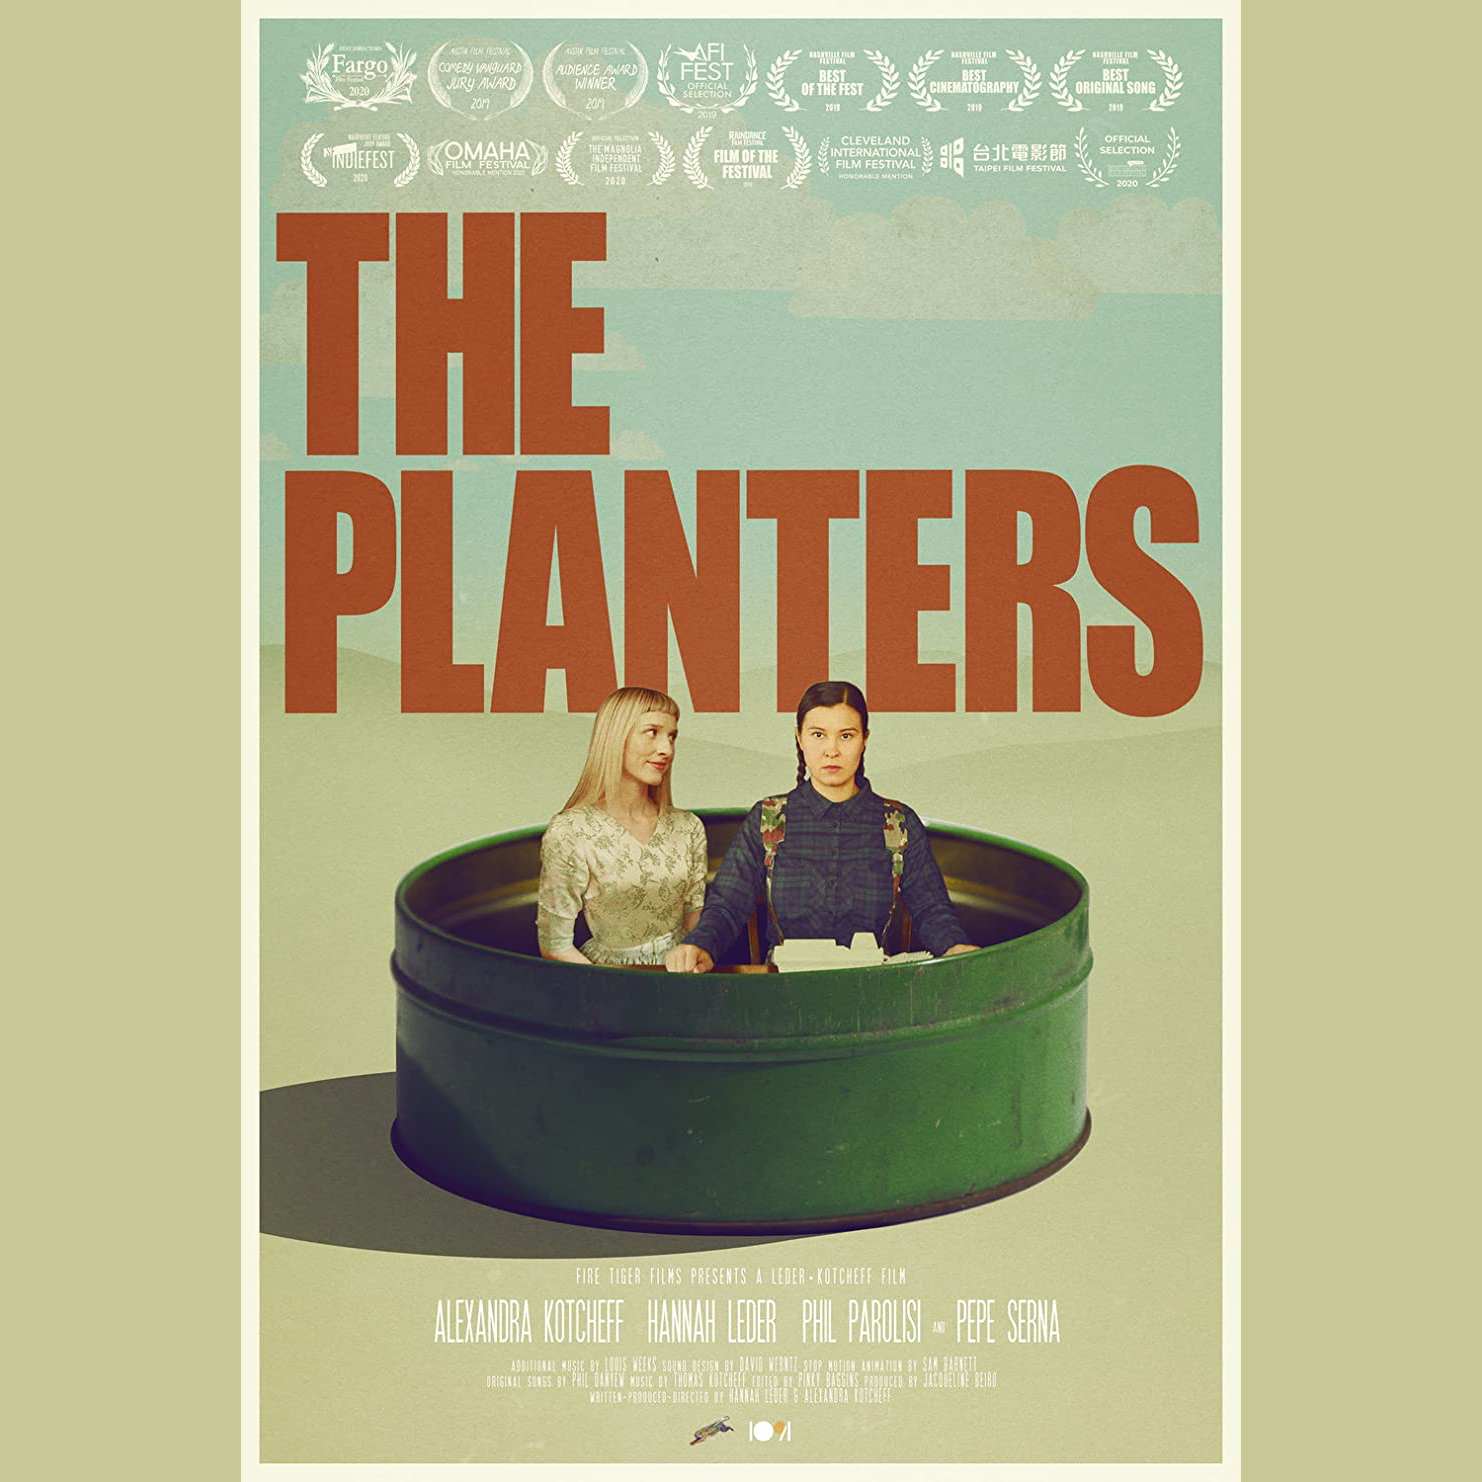 The Planters